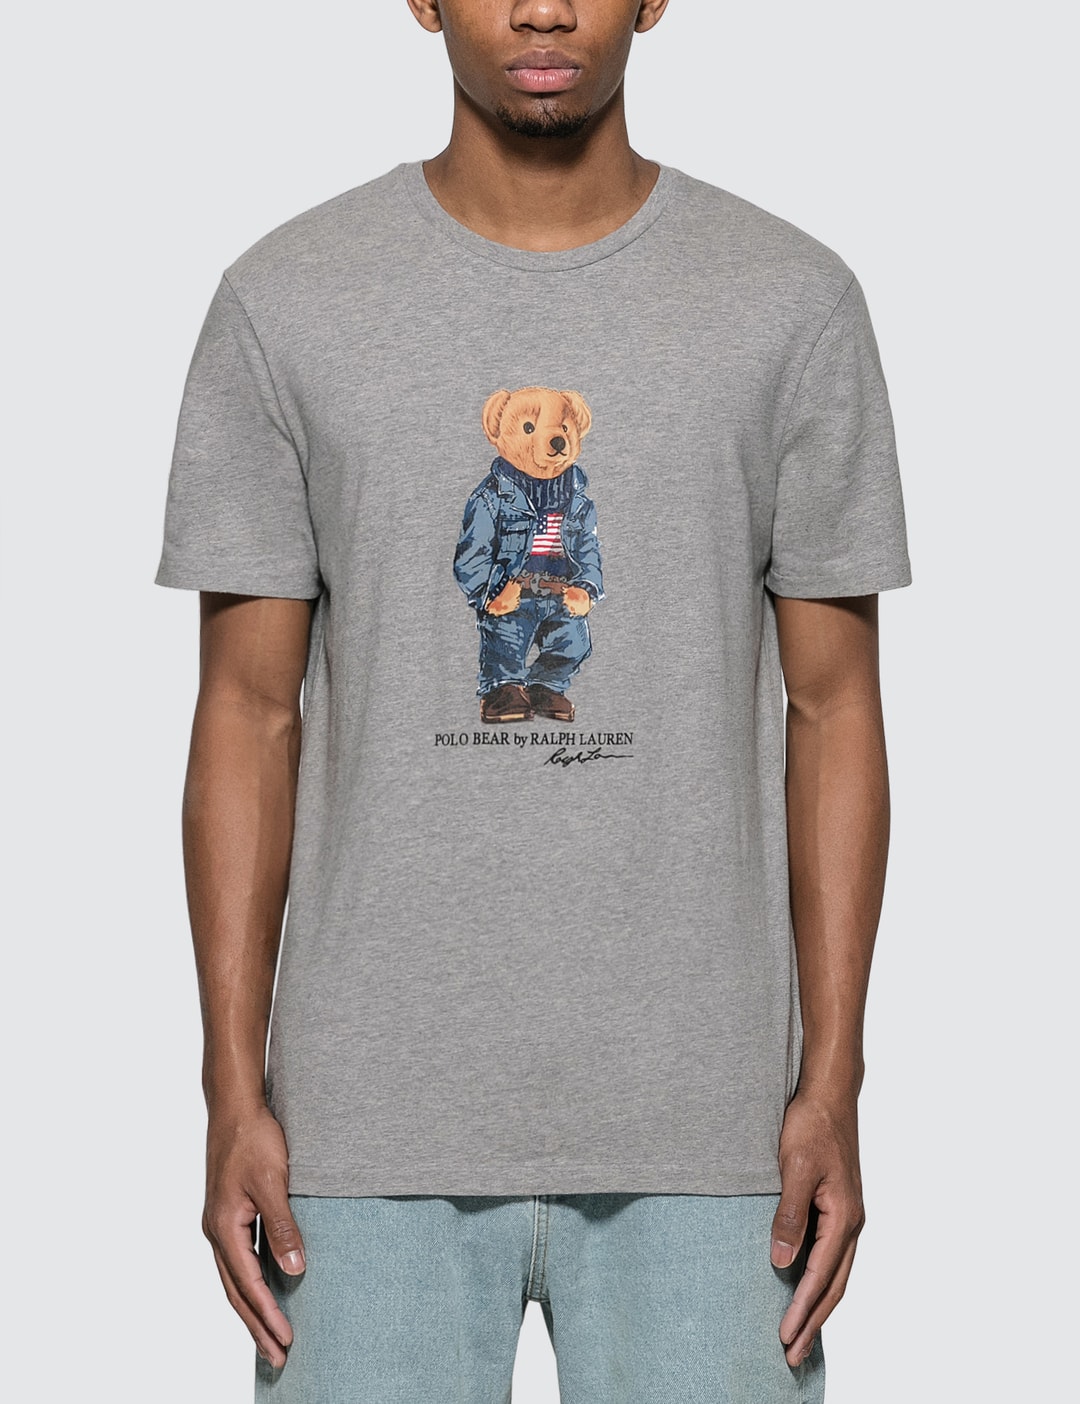 Disappointed City center Overall Polo Ralph Lauren - Polo Bear T-shirt | HBX - Globally Curated Fashion and  Lifestyle by Hypebeast